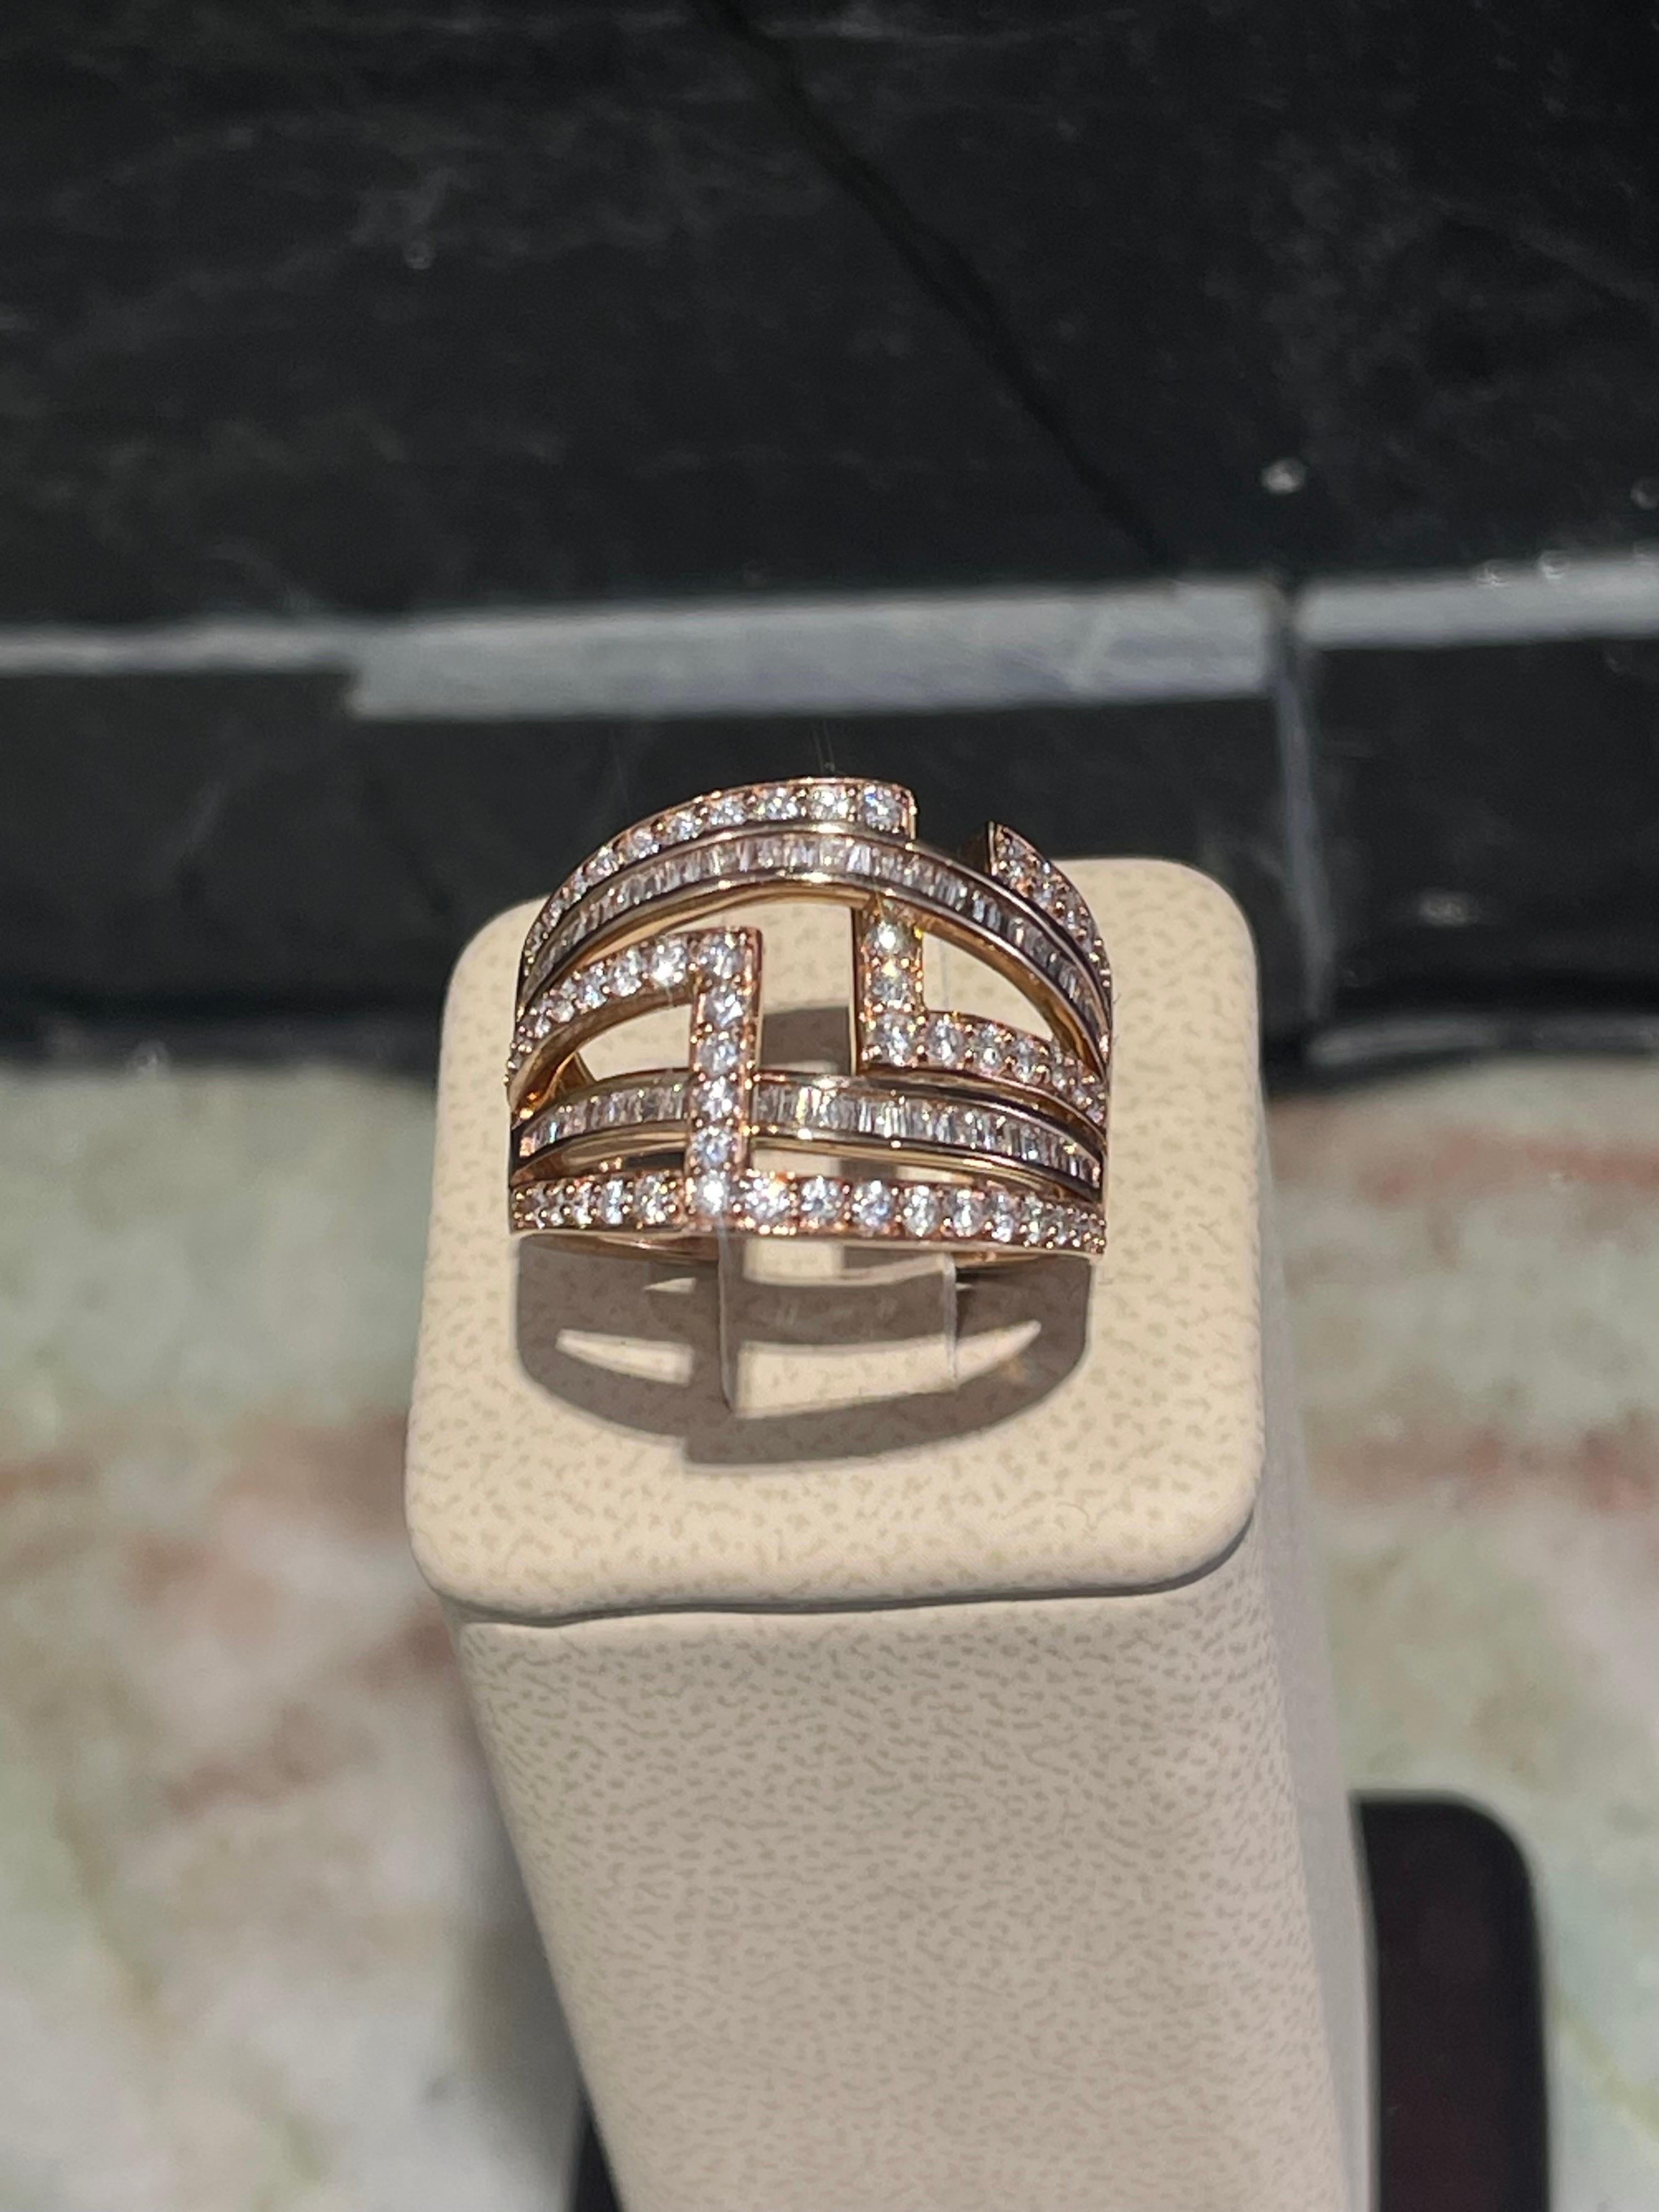 Stylish Diamond Ring In 14k Rose Gold .

Approximately 2 carats in clear round and baguette cut diamonds.

Size 7.